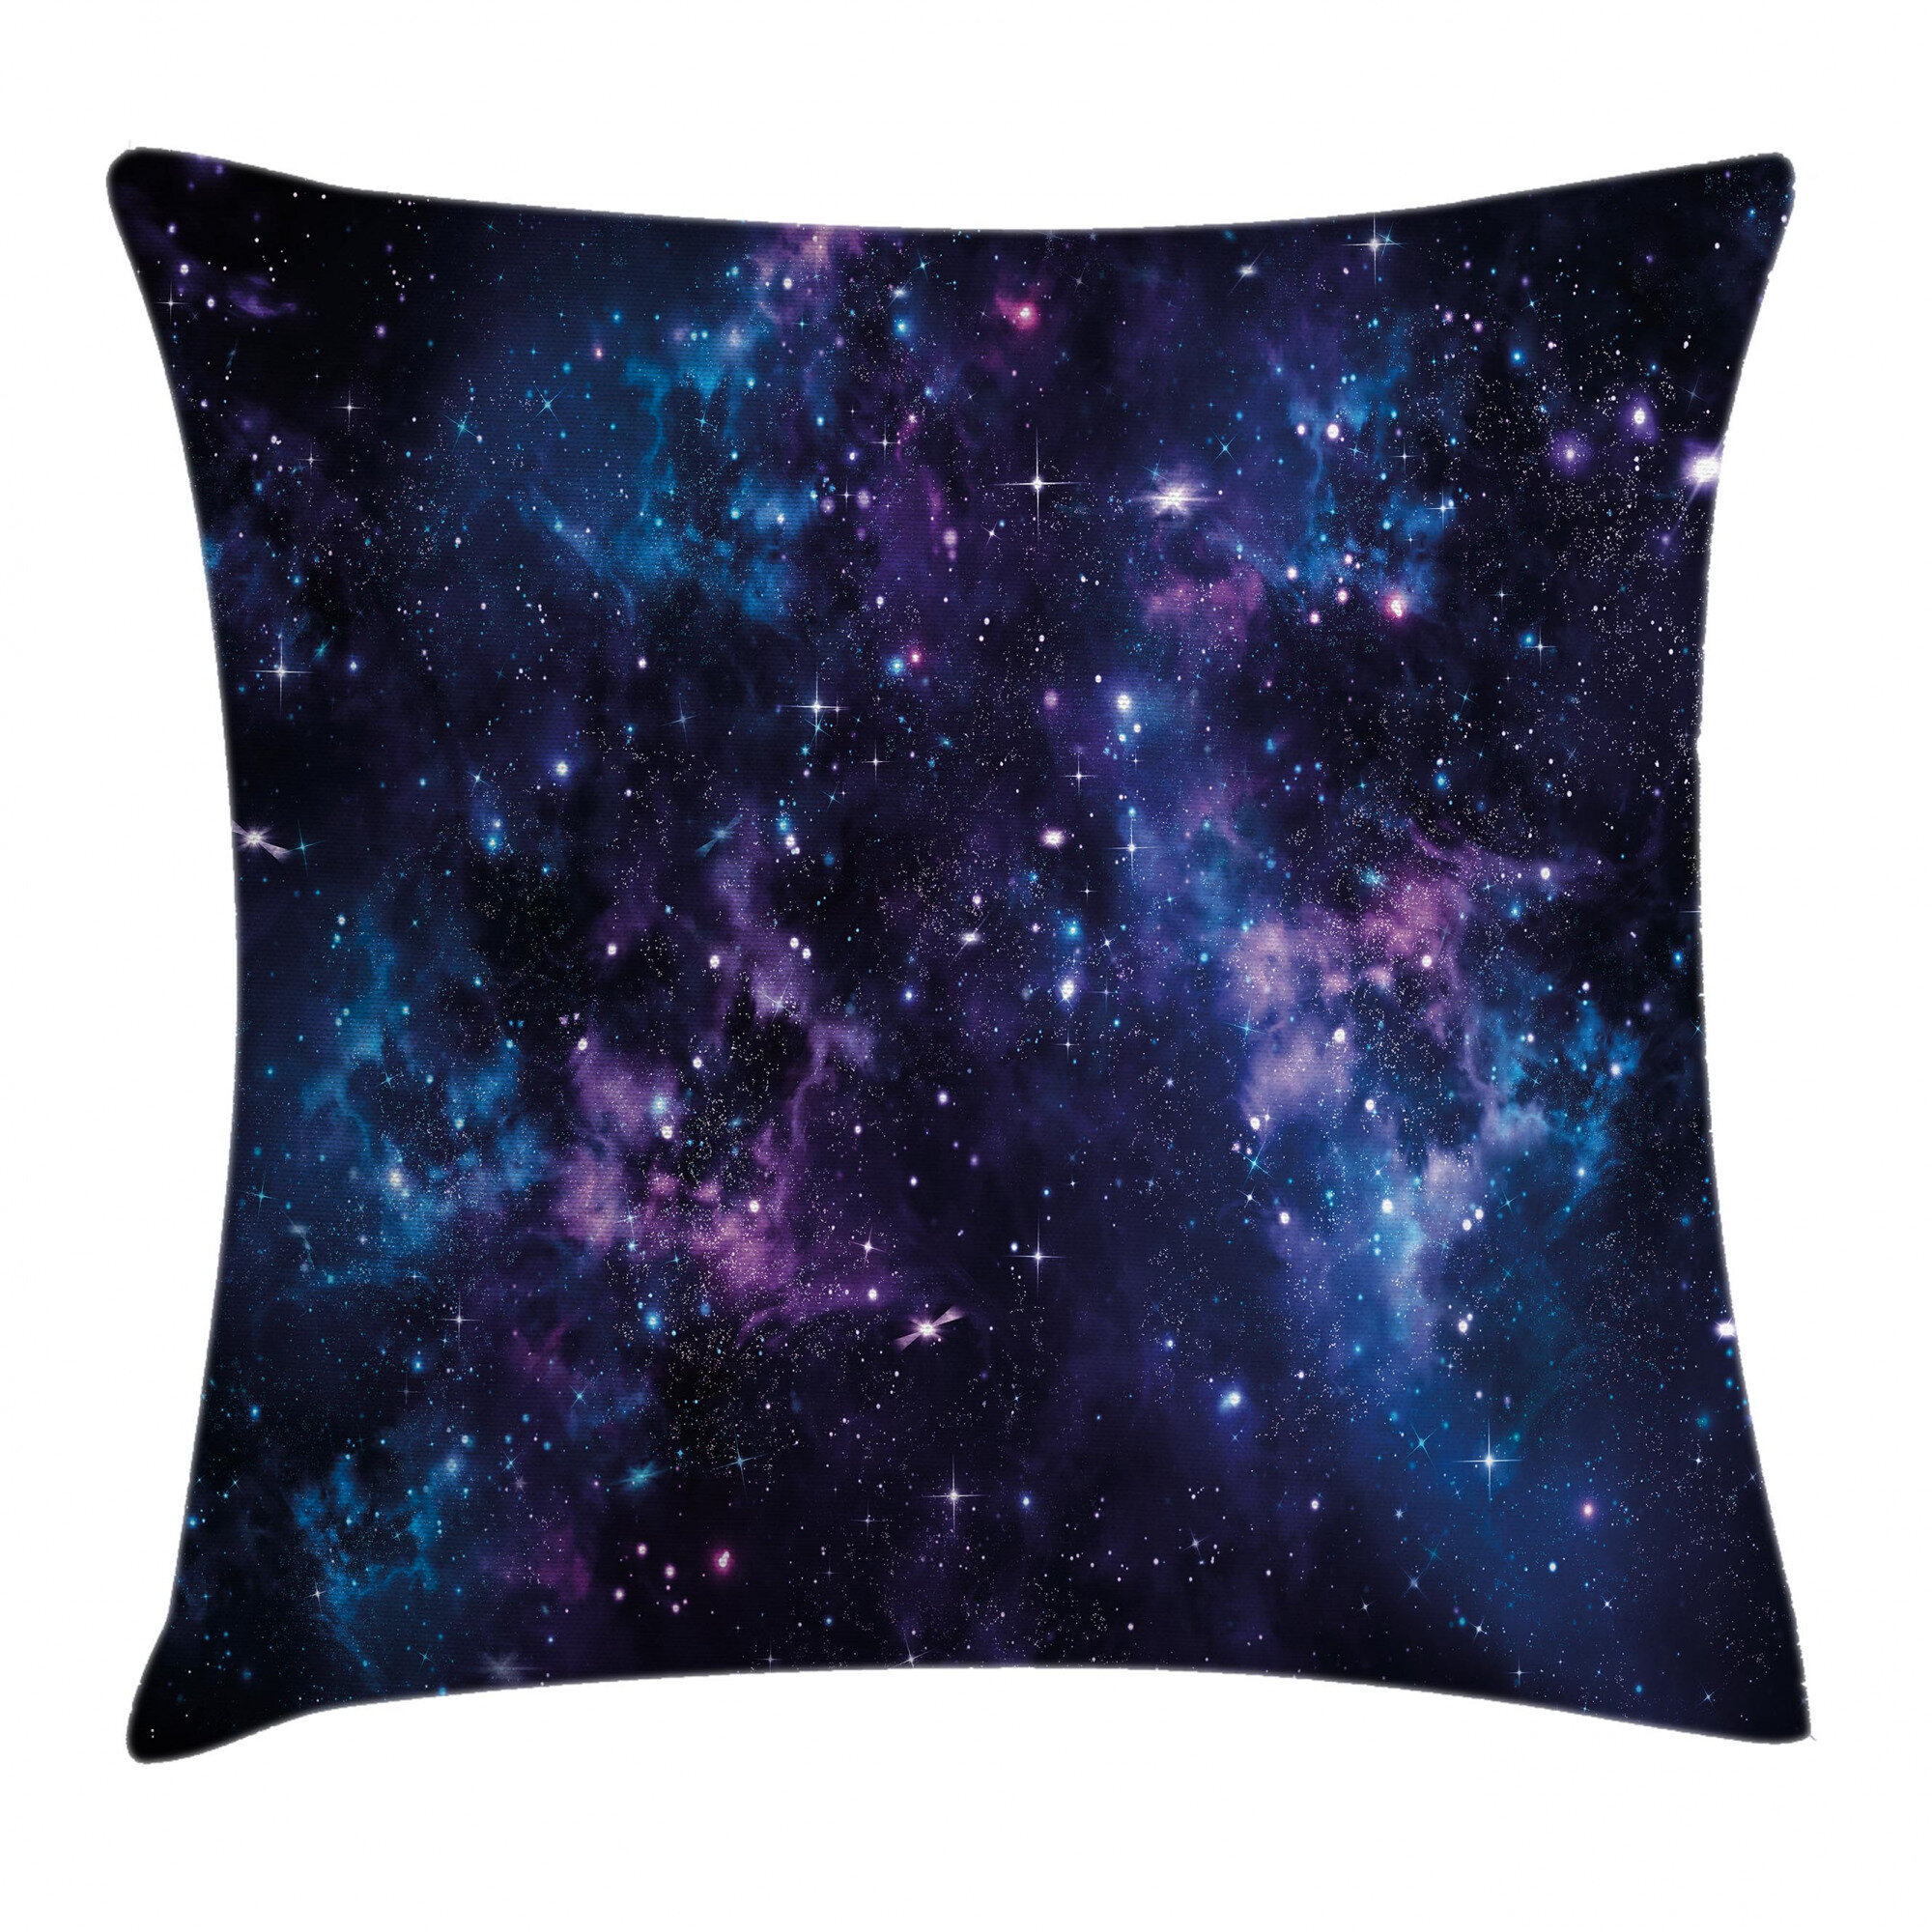 Nebula Football Team Throw Pillow Covers Pillow Cases Two Size Decorative Pillowcase Protecter with Zipper Without Insert for Sofa Bedroom Home Set of 2